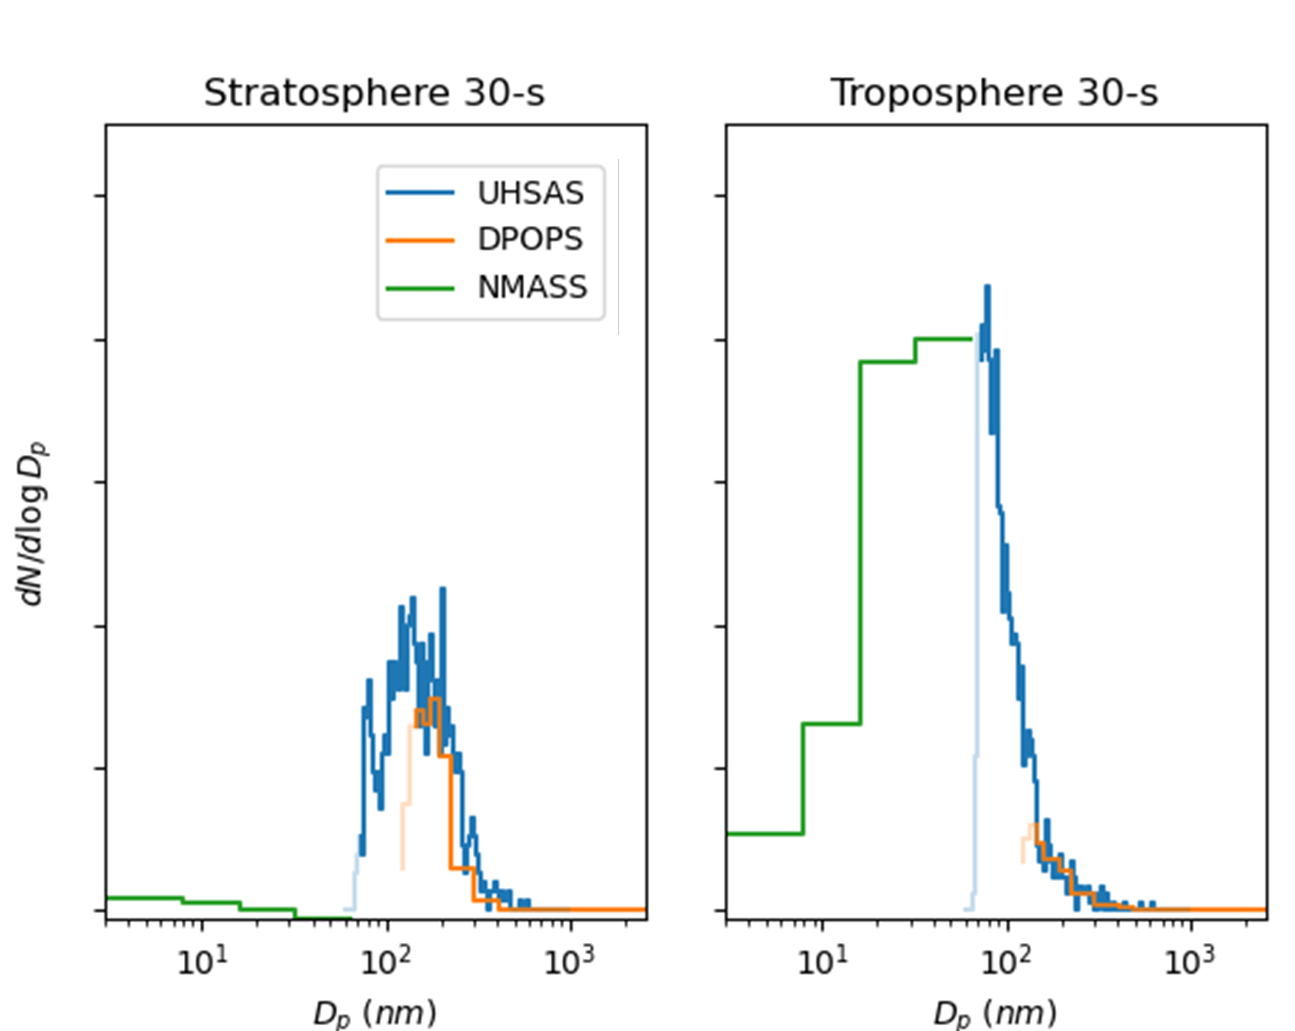 Figure 6: Aerosol size distributions for the instruments in regions of the stratosphere and troposphere with 30-s averaging.